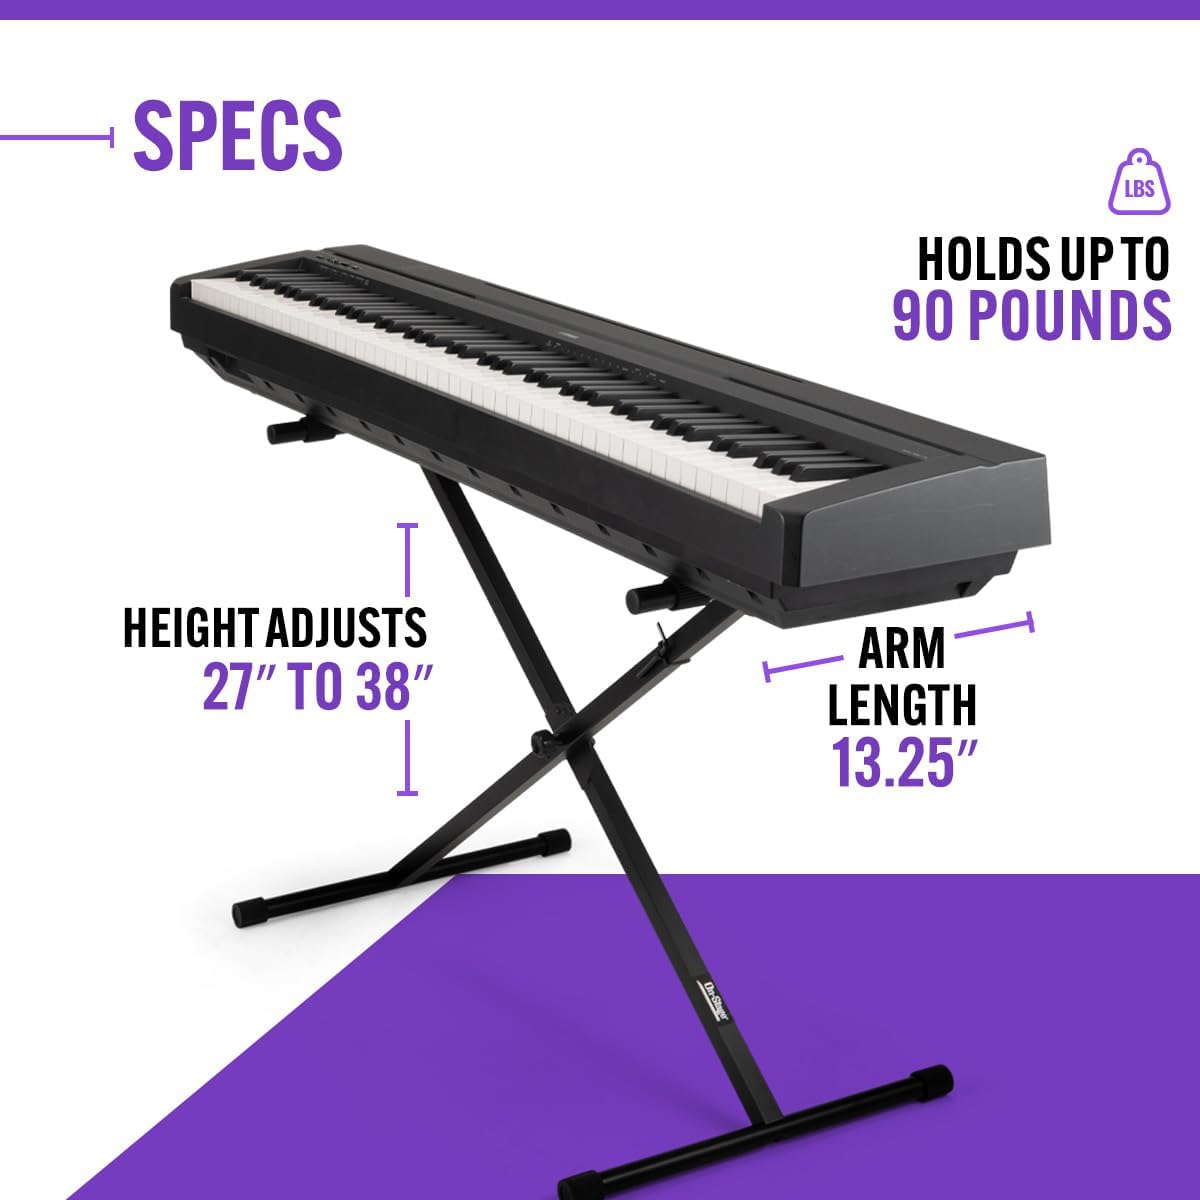 On-Stage Stands KS7190 Classic Single-X Keyboard Stand